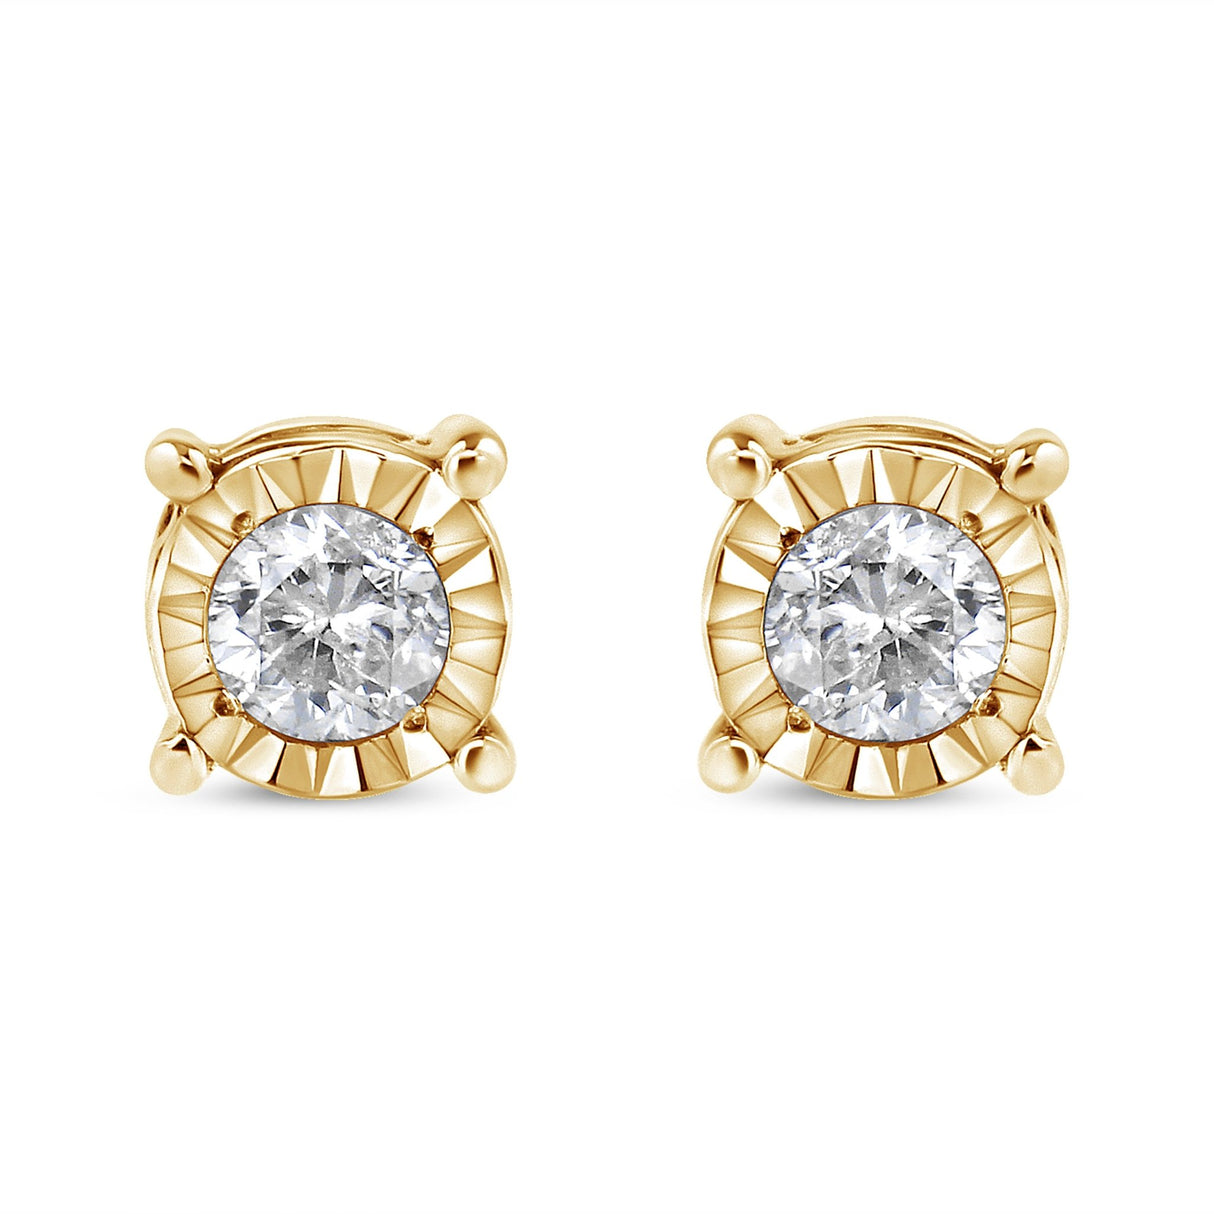 10K Yellow Gold Over .925 Sterling Silver 1/5 Cttw Round Near Colorless Diamond Miracle-Set Stud Earrings (J-K Color, I2-I3 Clarity) - Tuesday Morning-Stud Earrings